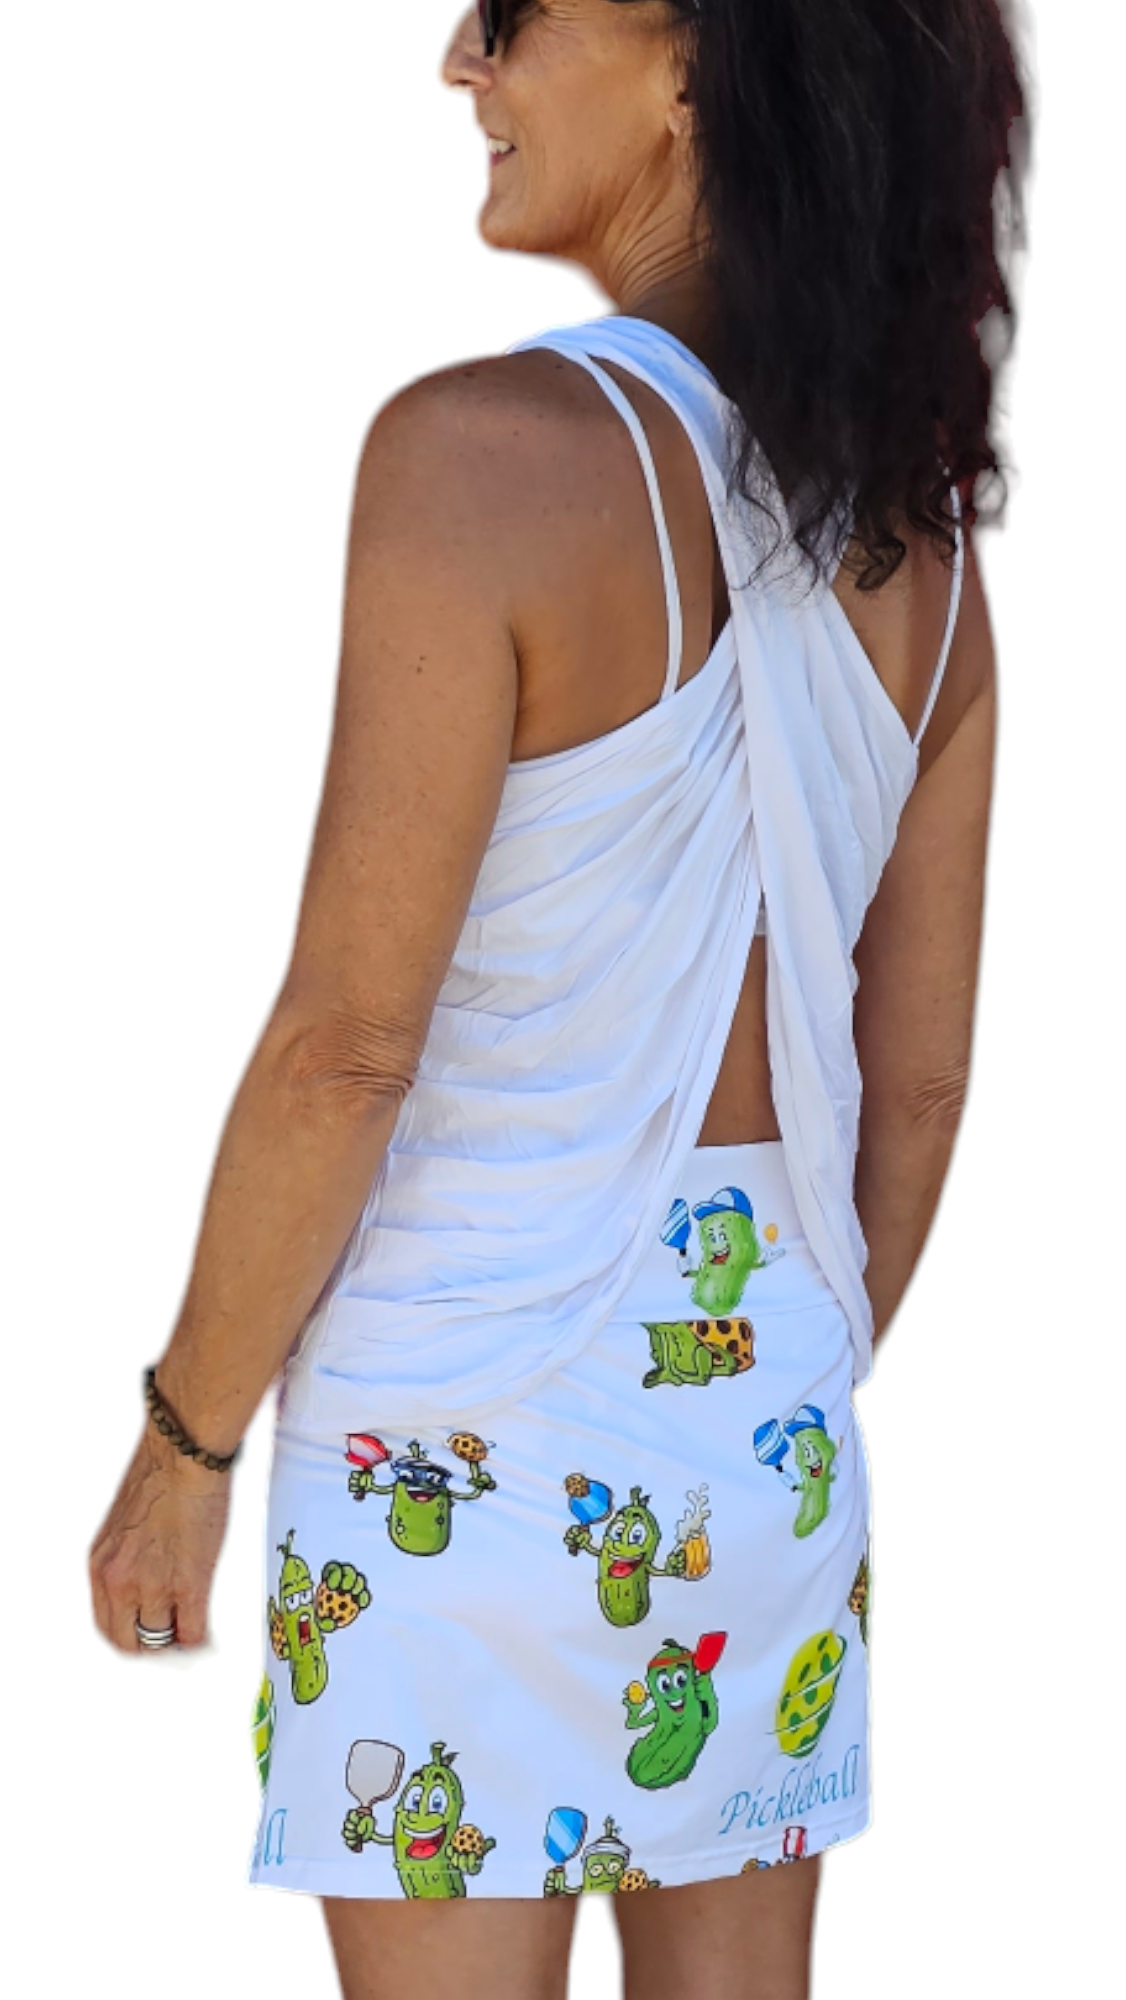 YOGAZ New Pickles Playing Pickleball Skorts are here in Sizes Extra Extra Small to XXL